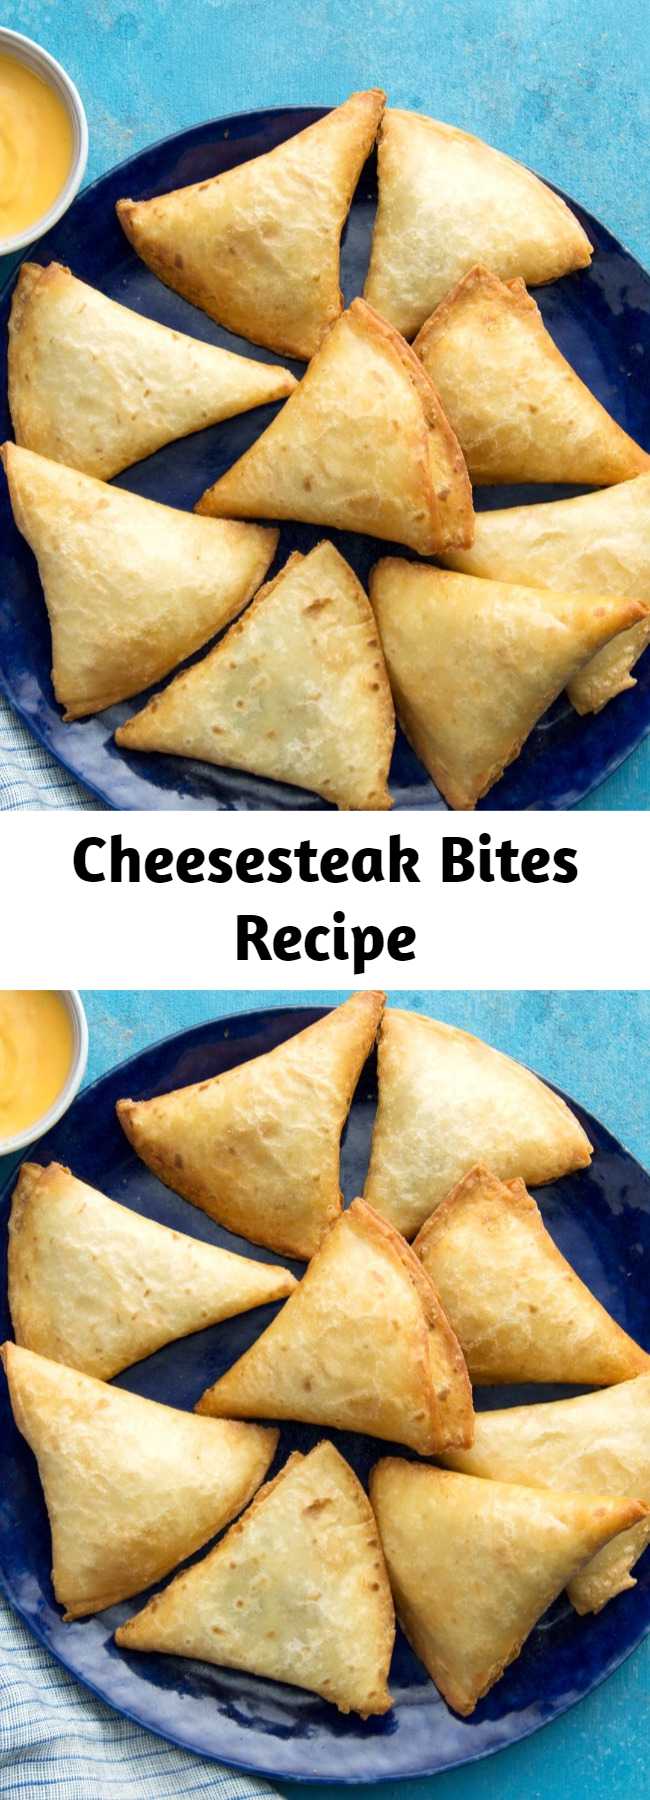 Cheesesteak Bites Recipe - Lil' pockets of flavorful beef, cheese, and pure joy. Happy snacking!